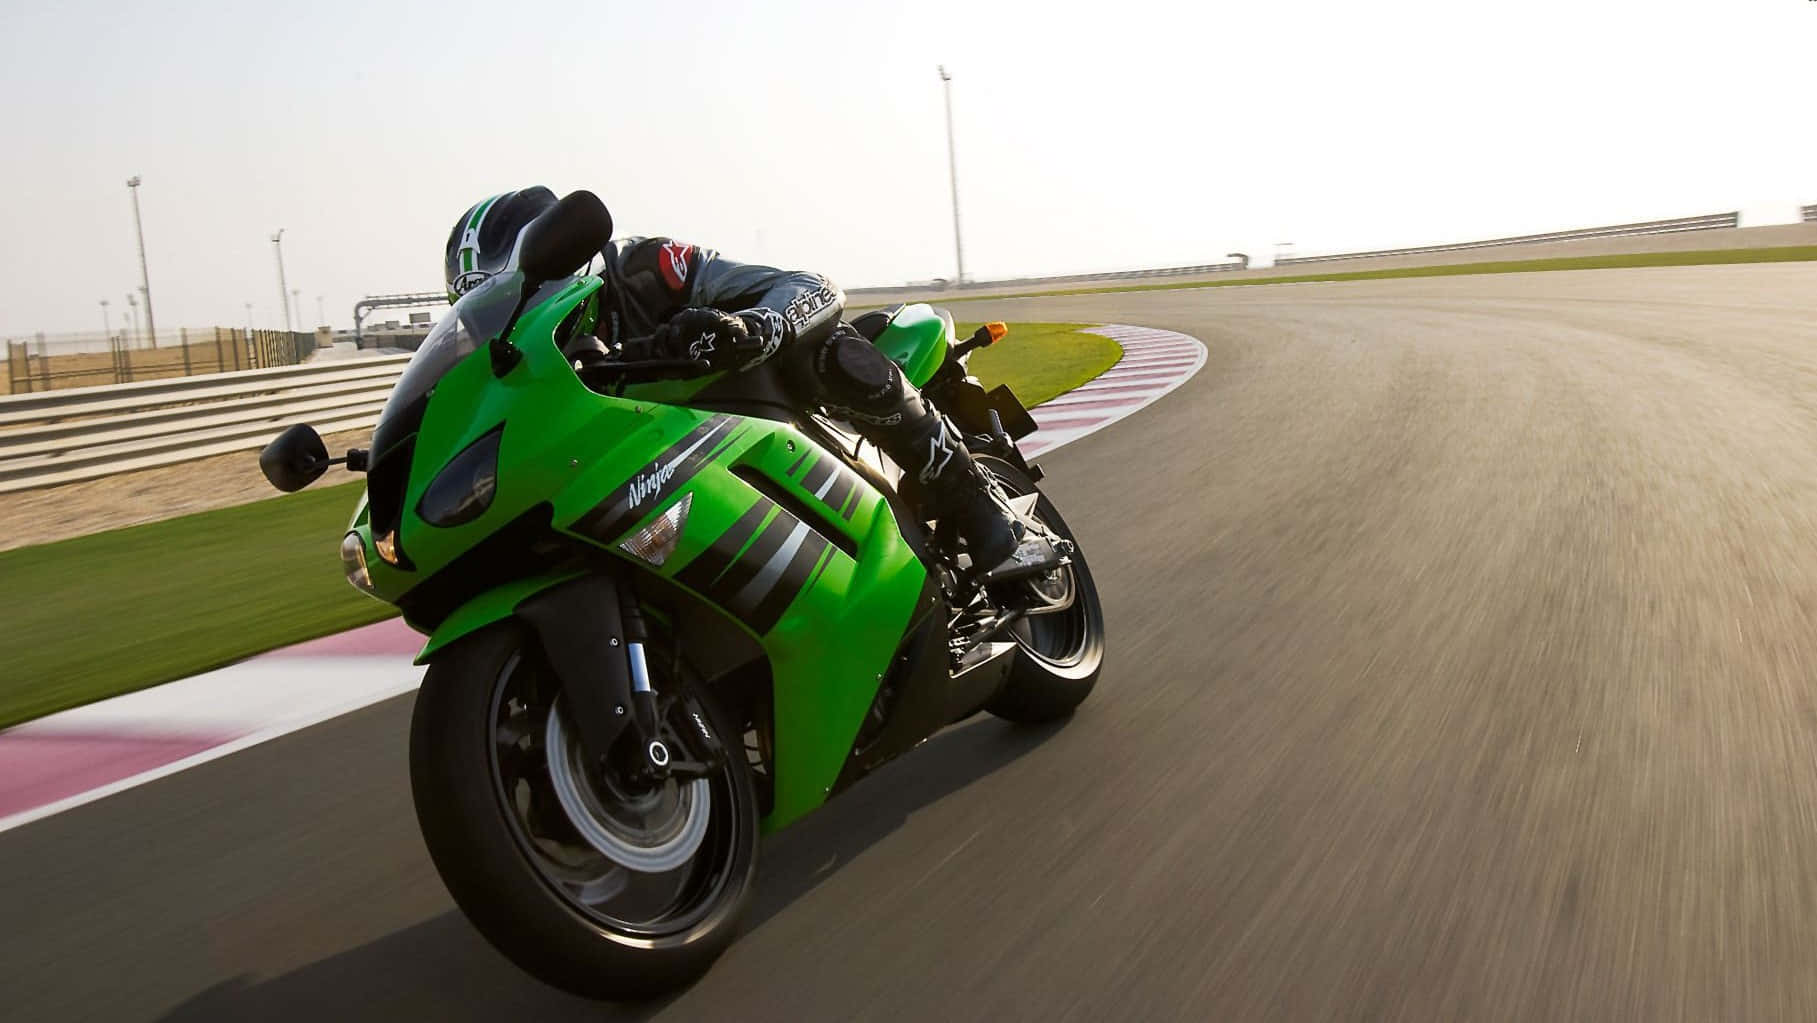 A Green Motorcycle Is Racing Down A Track Wallpaper